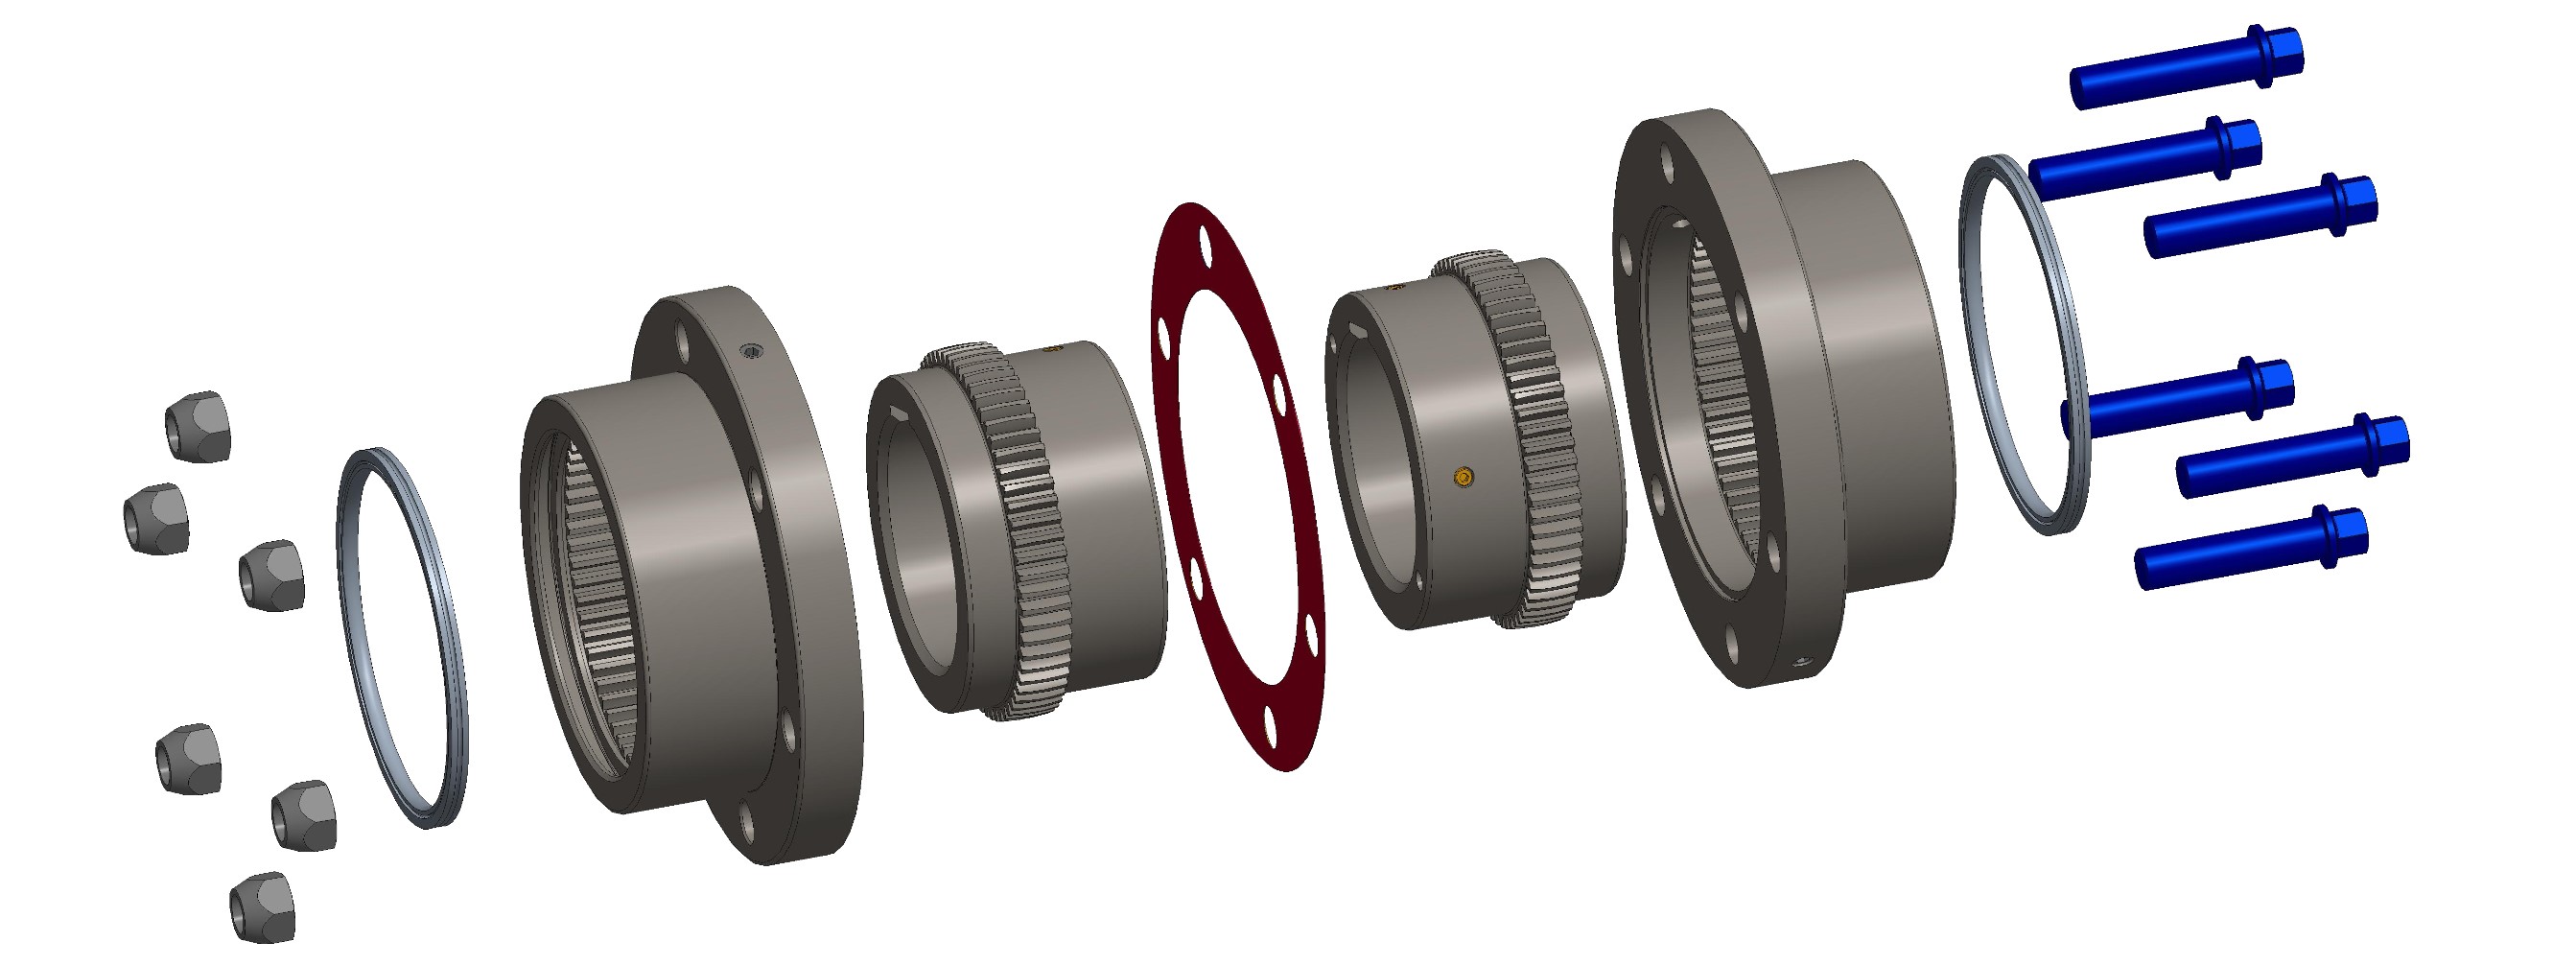 Accessory Kits for Lovejoy Flanged HercuFlex Gear Coupling Types 